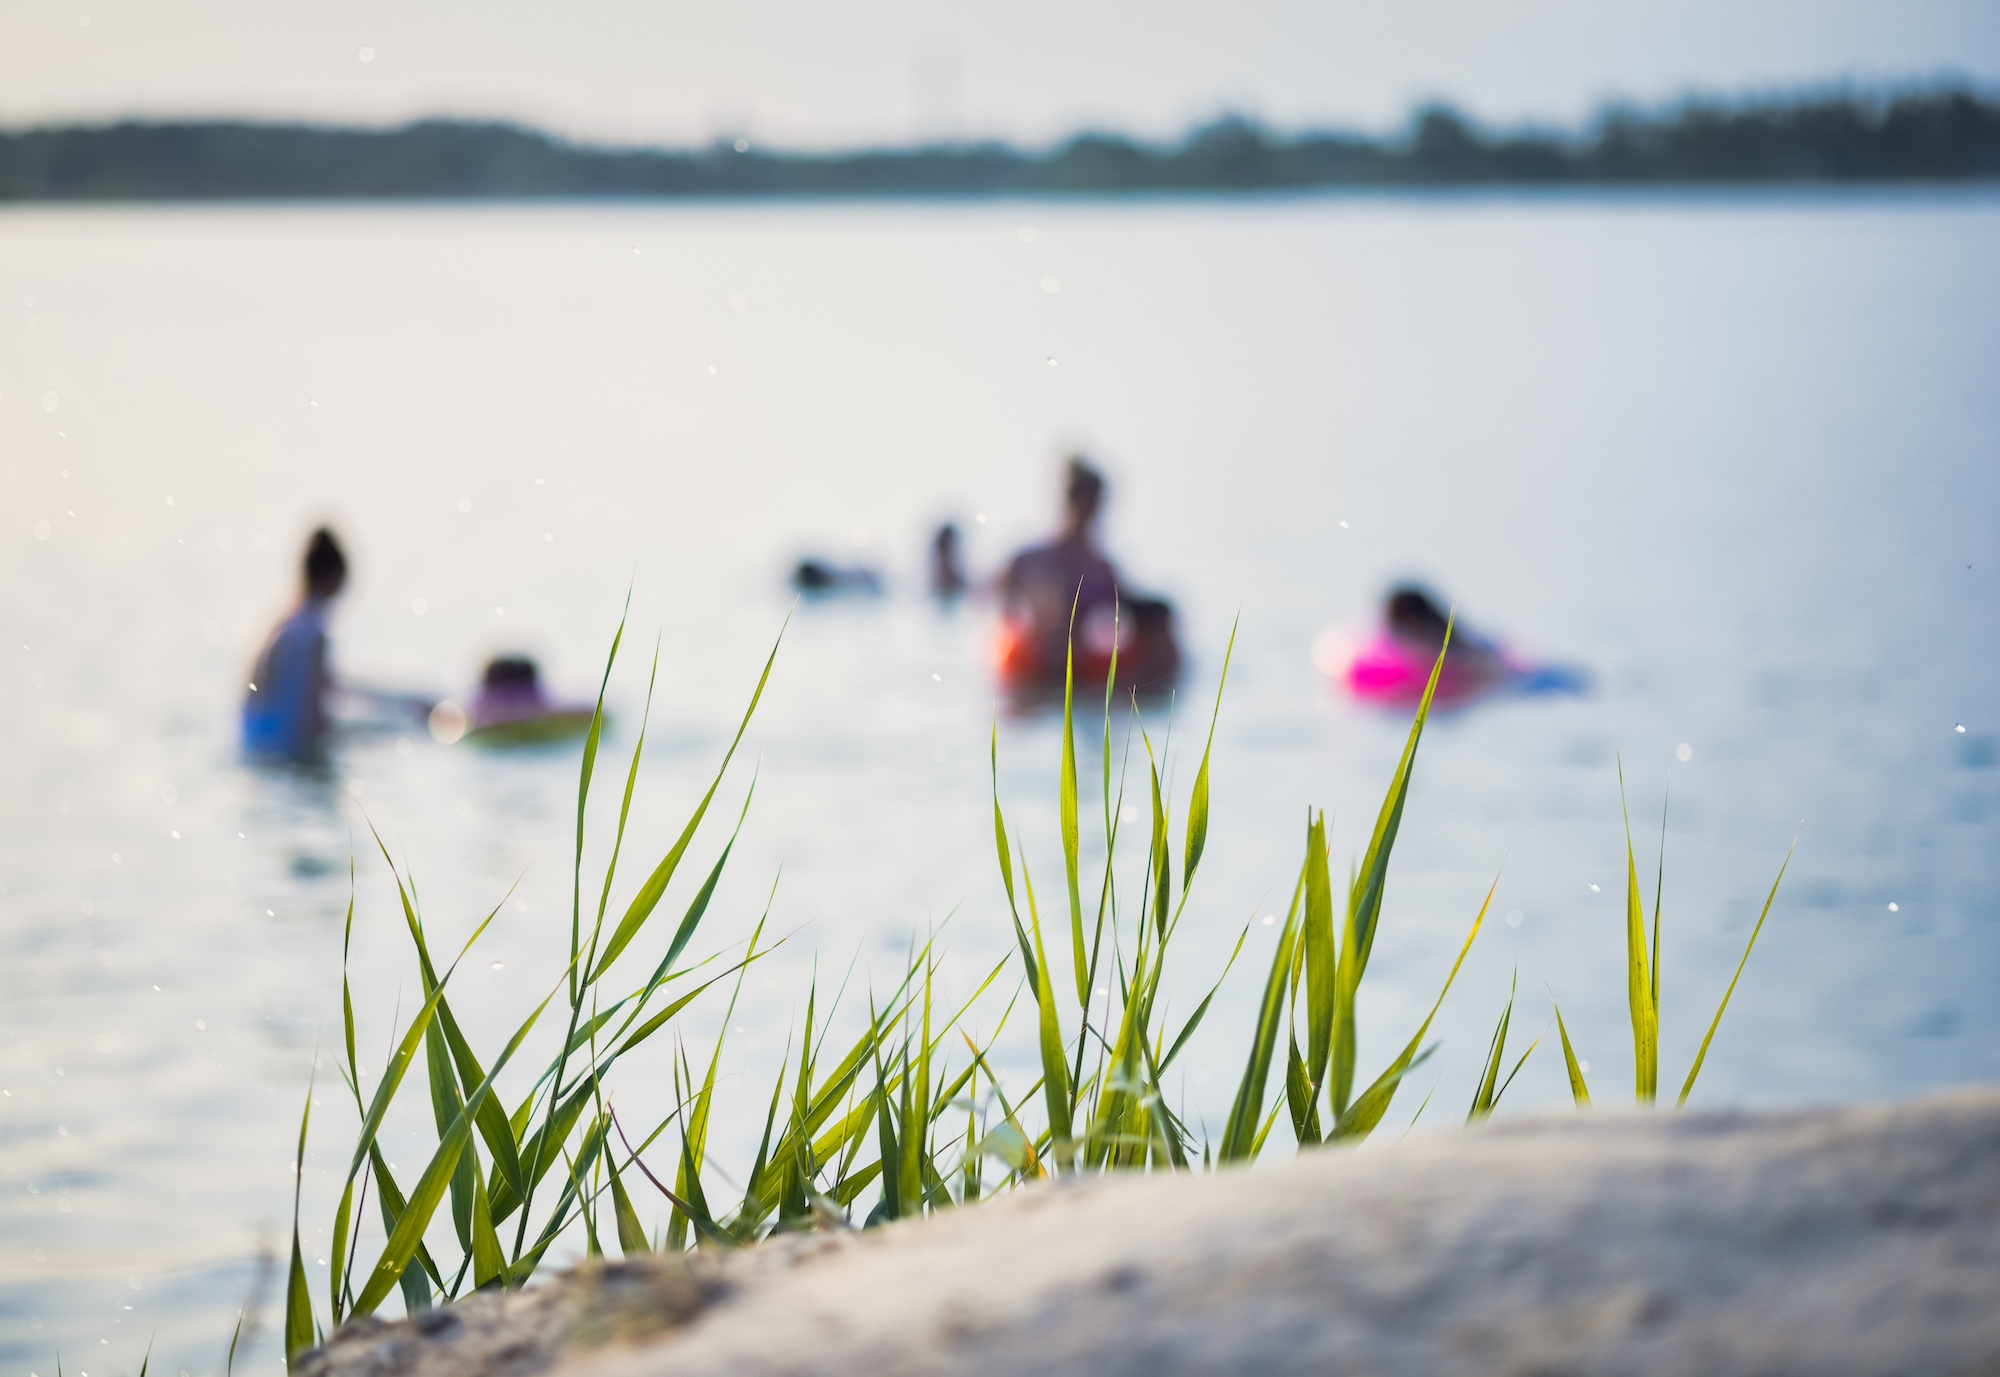 When it comes to drowning accidents, understanding liability and legal remedies is essential. Before heading out to a lake like the family in this image, ensure you take all safety precautions.